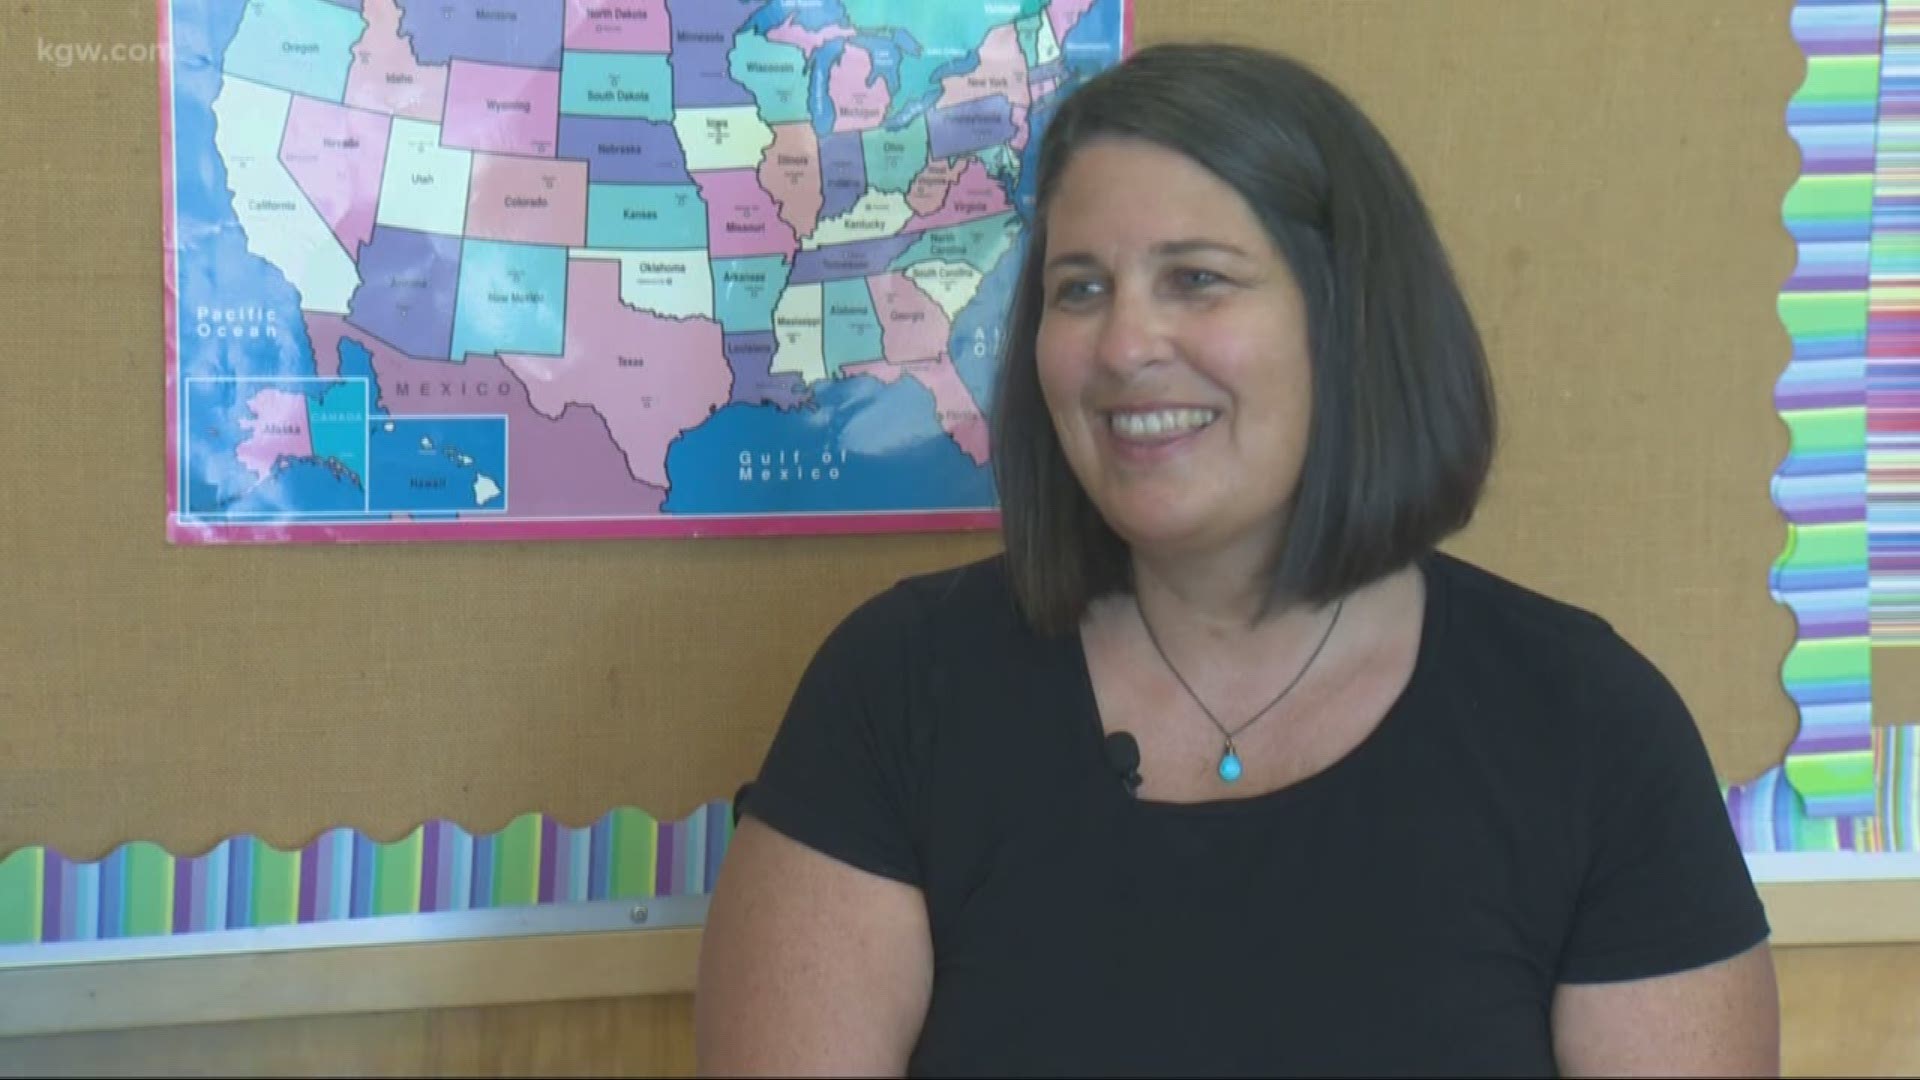 KGW Sunrise anchor Brenda Braxton asked teacher Sarah Kohn eight questions about being a 5th grade teacher. If she could take her students anywhere on a field trip, it would be to Washington D.C.